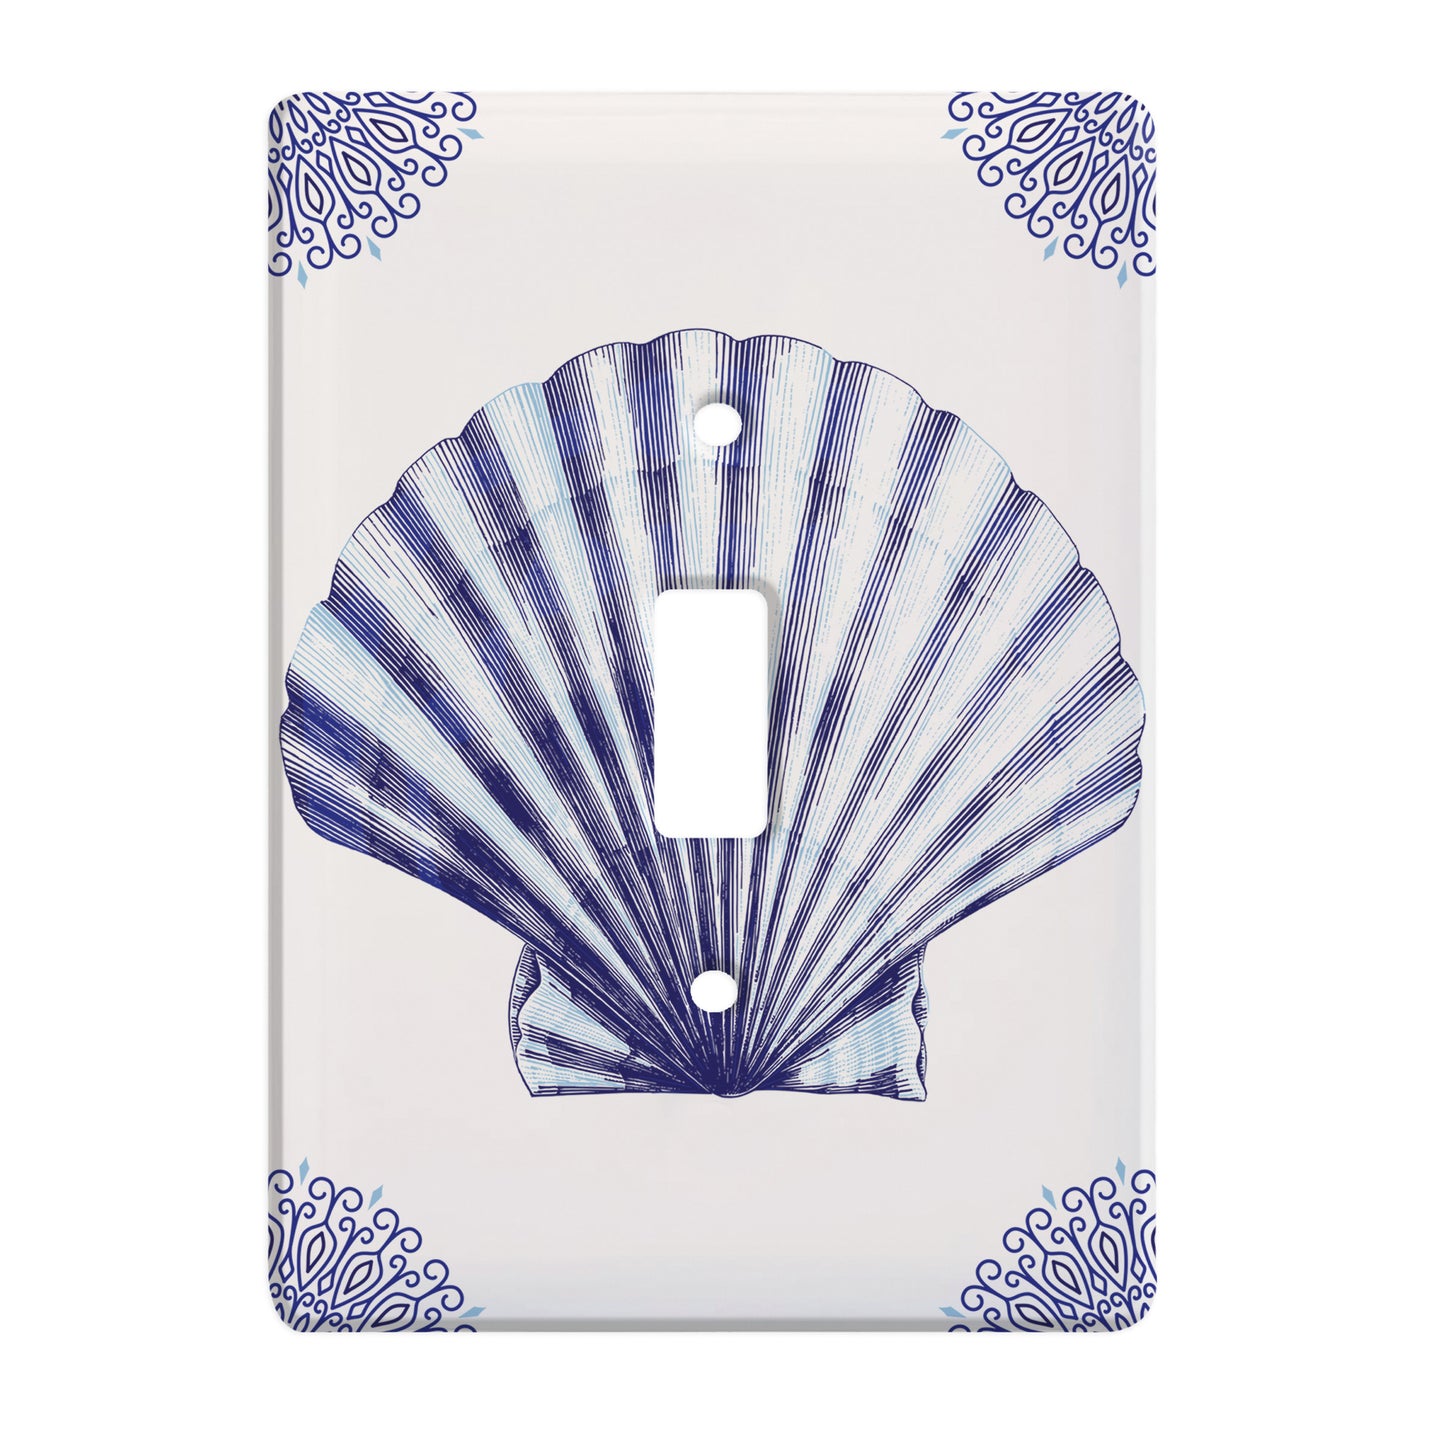 white ceramic single toggle switch plate featuring blue scallop shell and blue decorative corners.